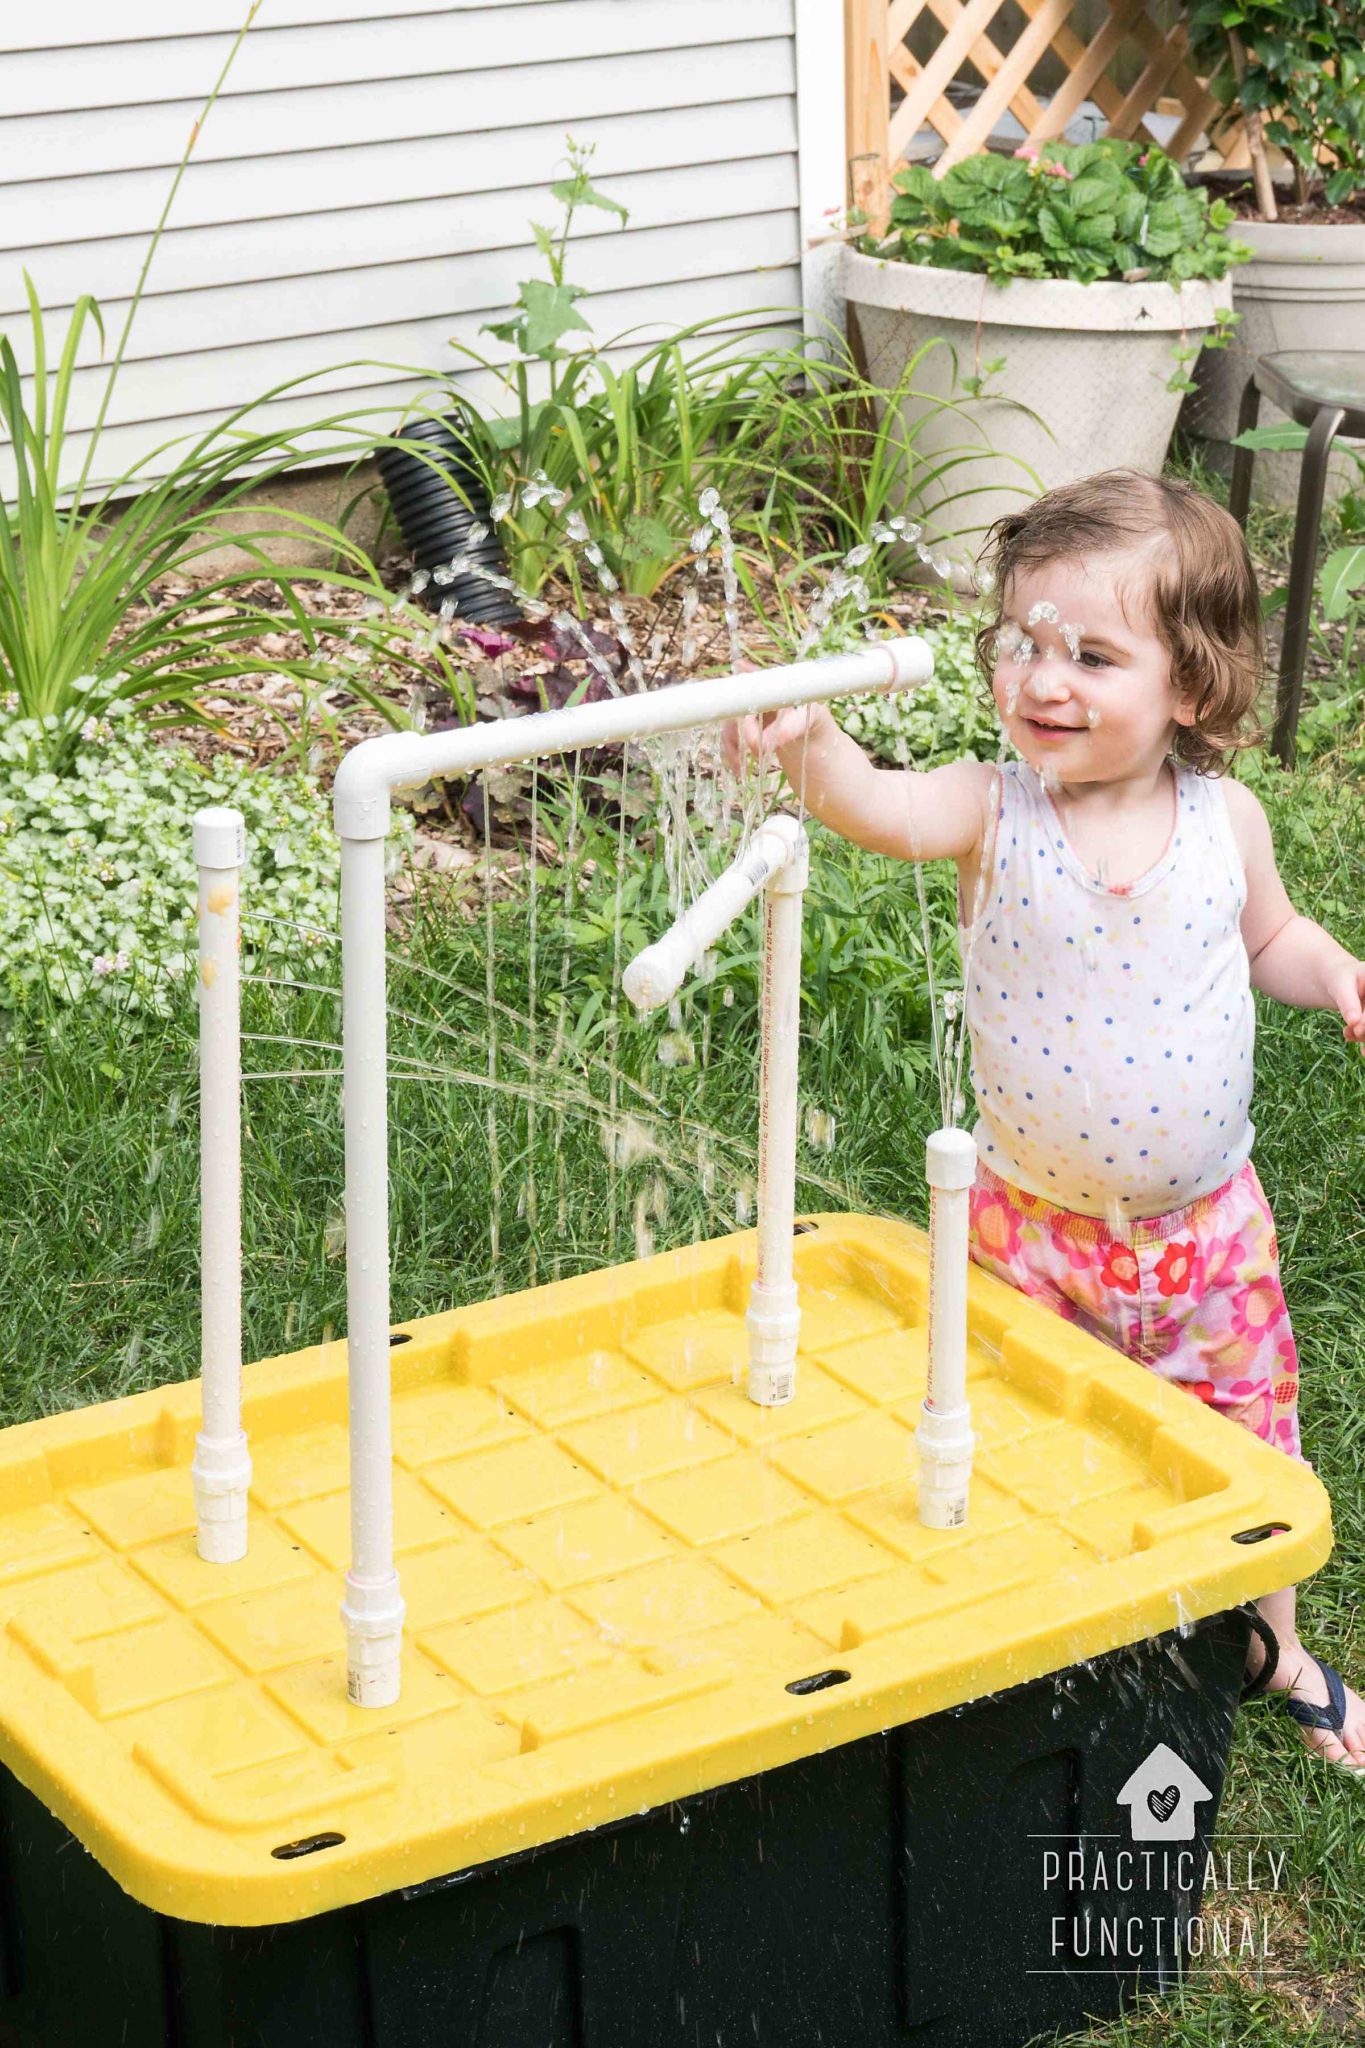 DIY Water Table With Fountains And Sprayers